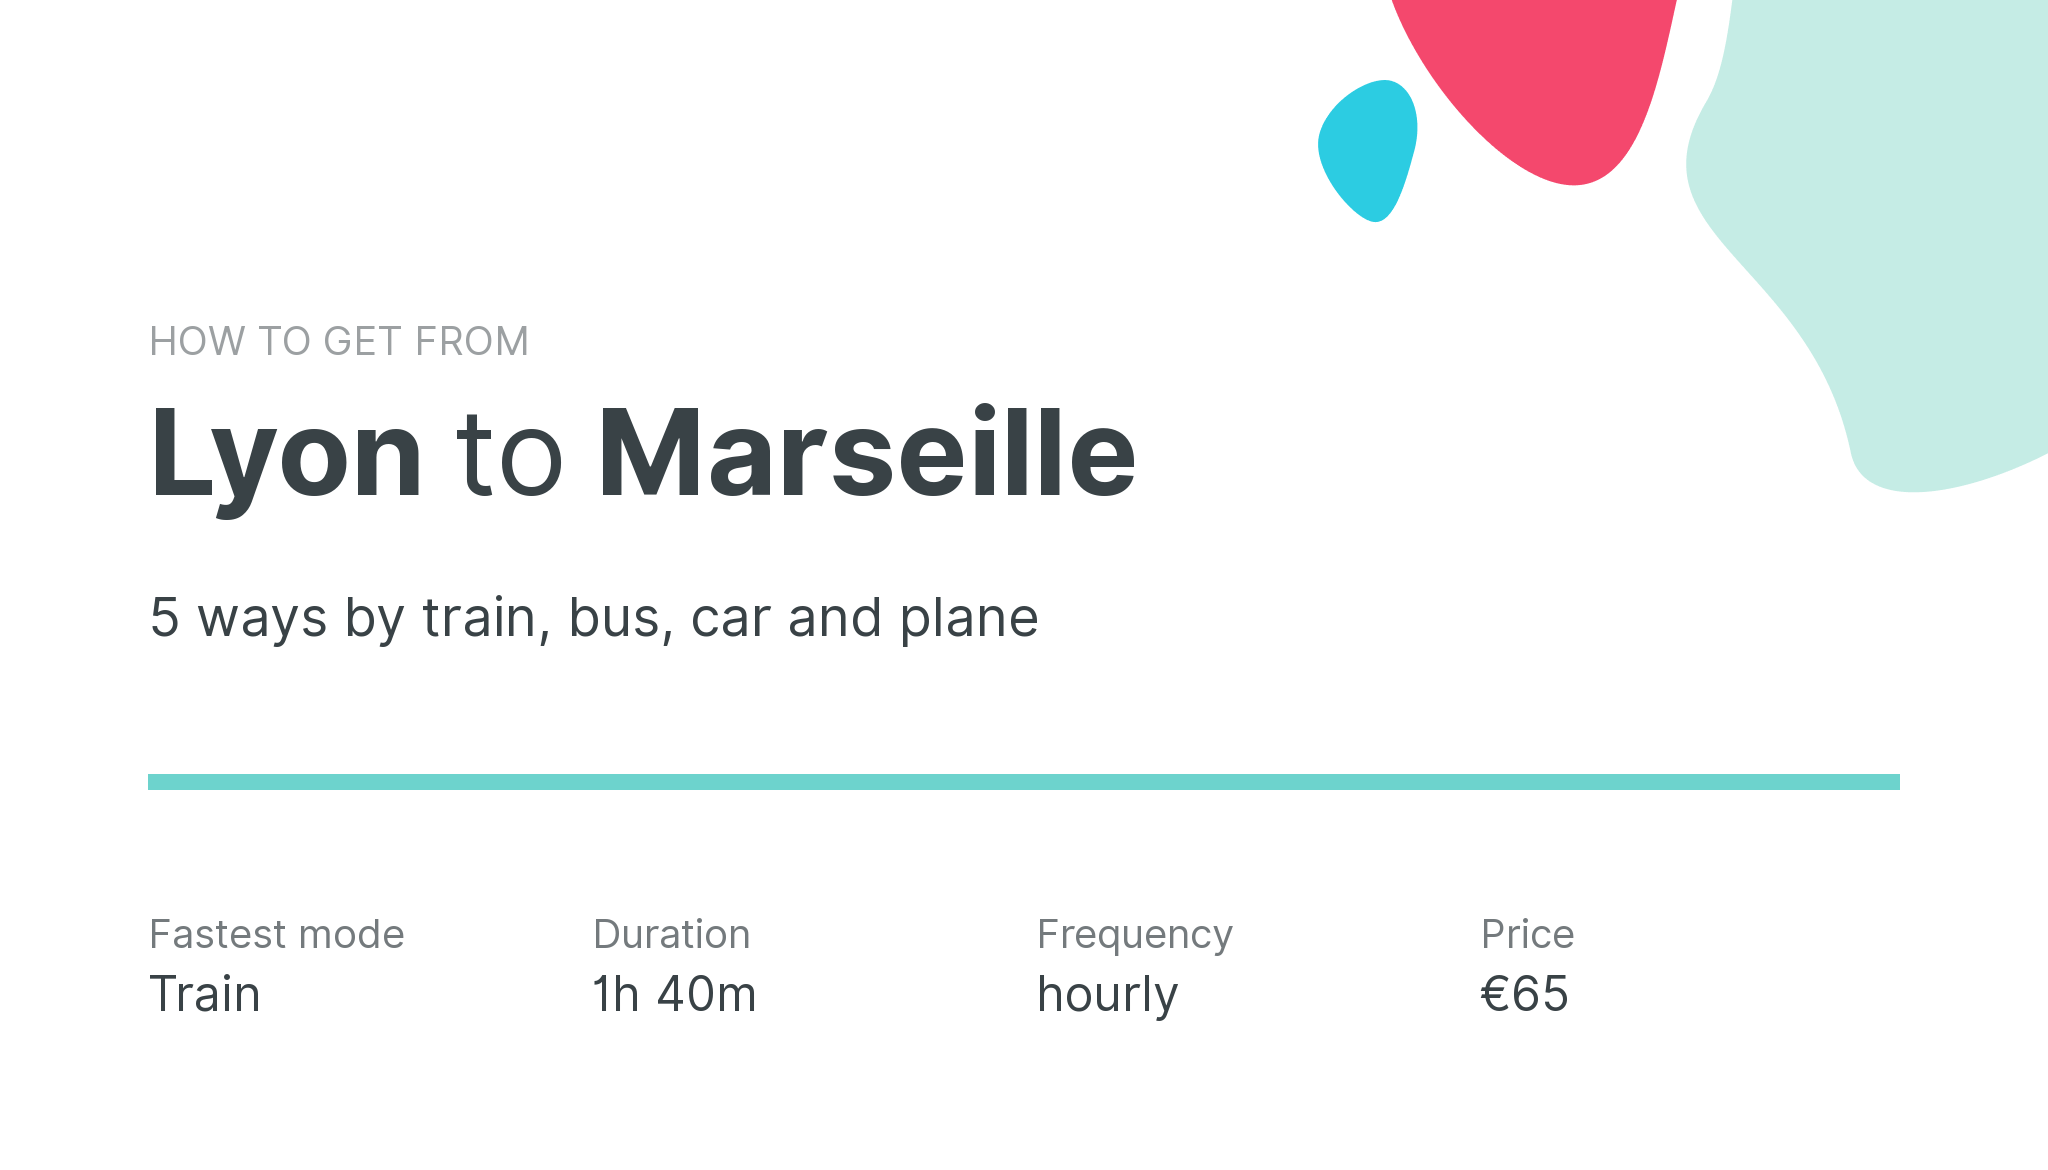 How do I get from Lyon to Marseille